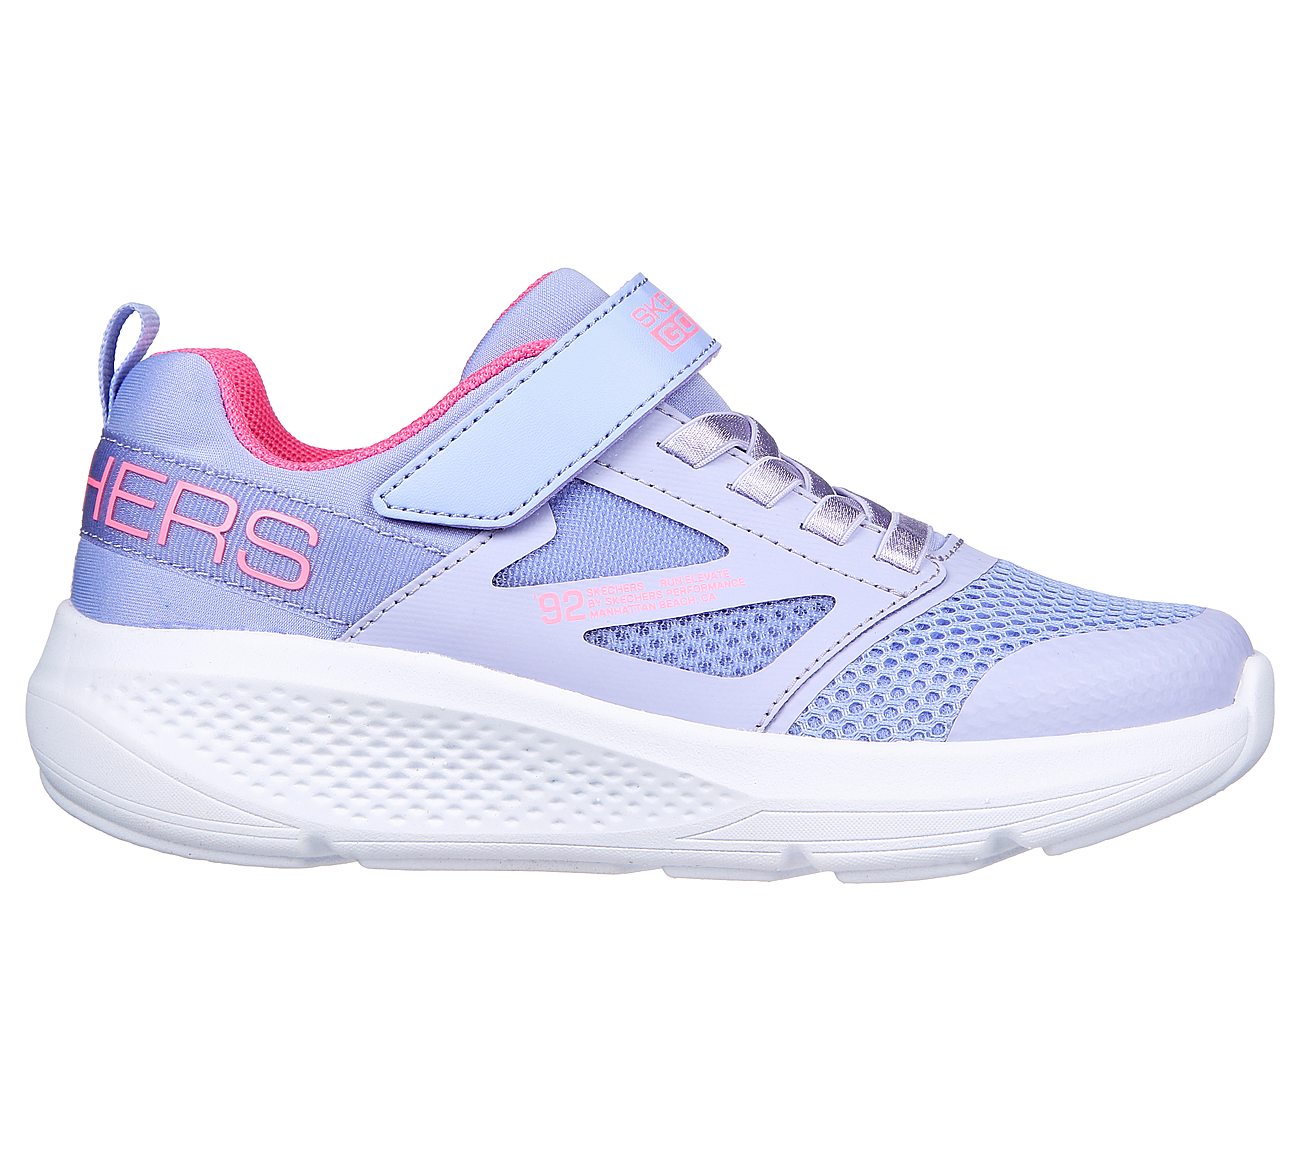 GO RUN ELEVATE - UP STEP, LAVENDER/HOT PINK Footwear Lateral View